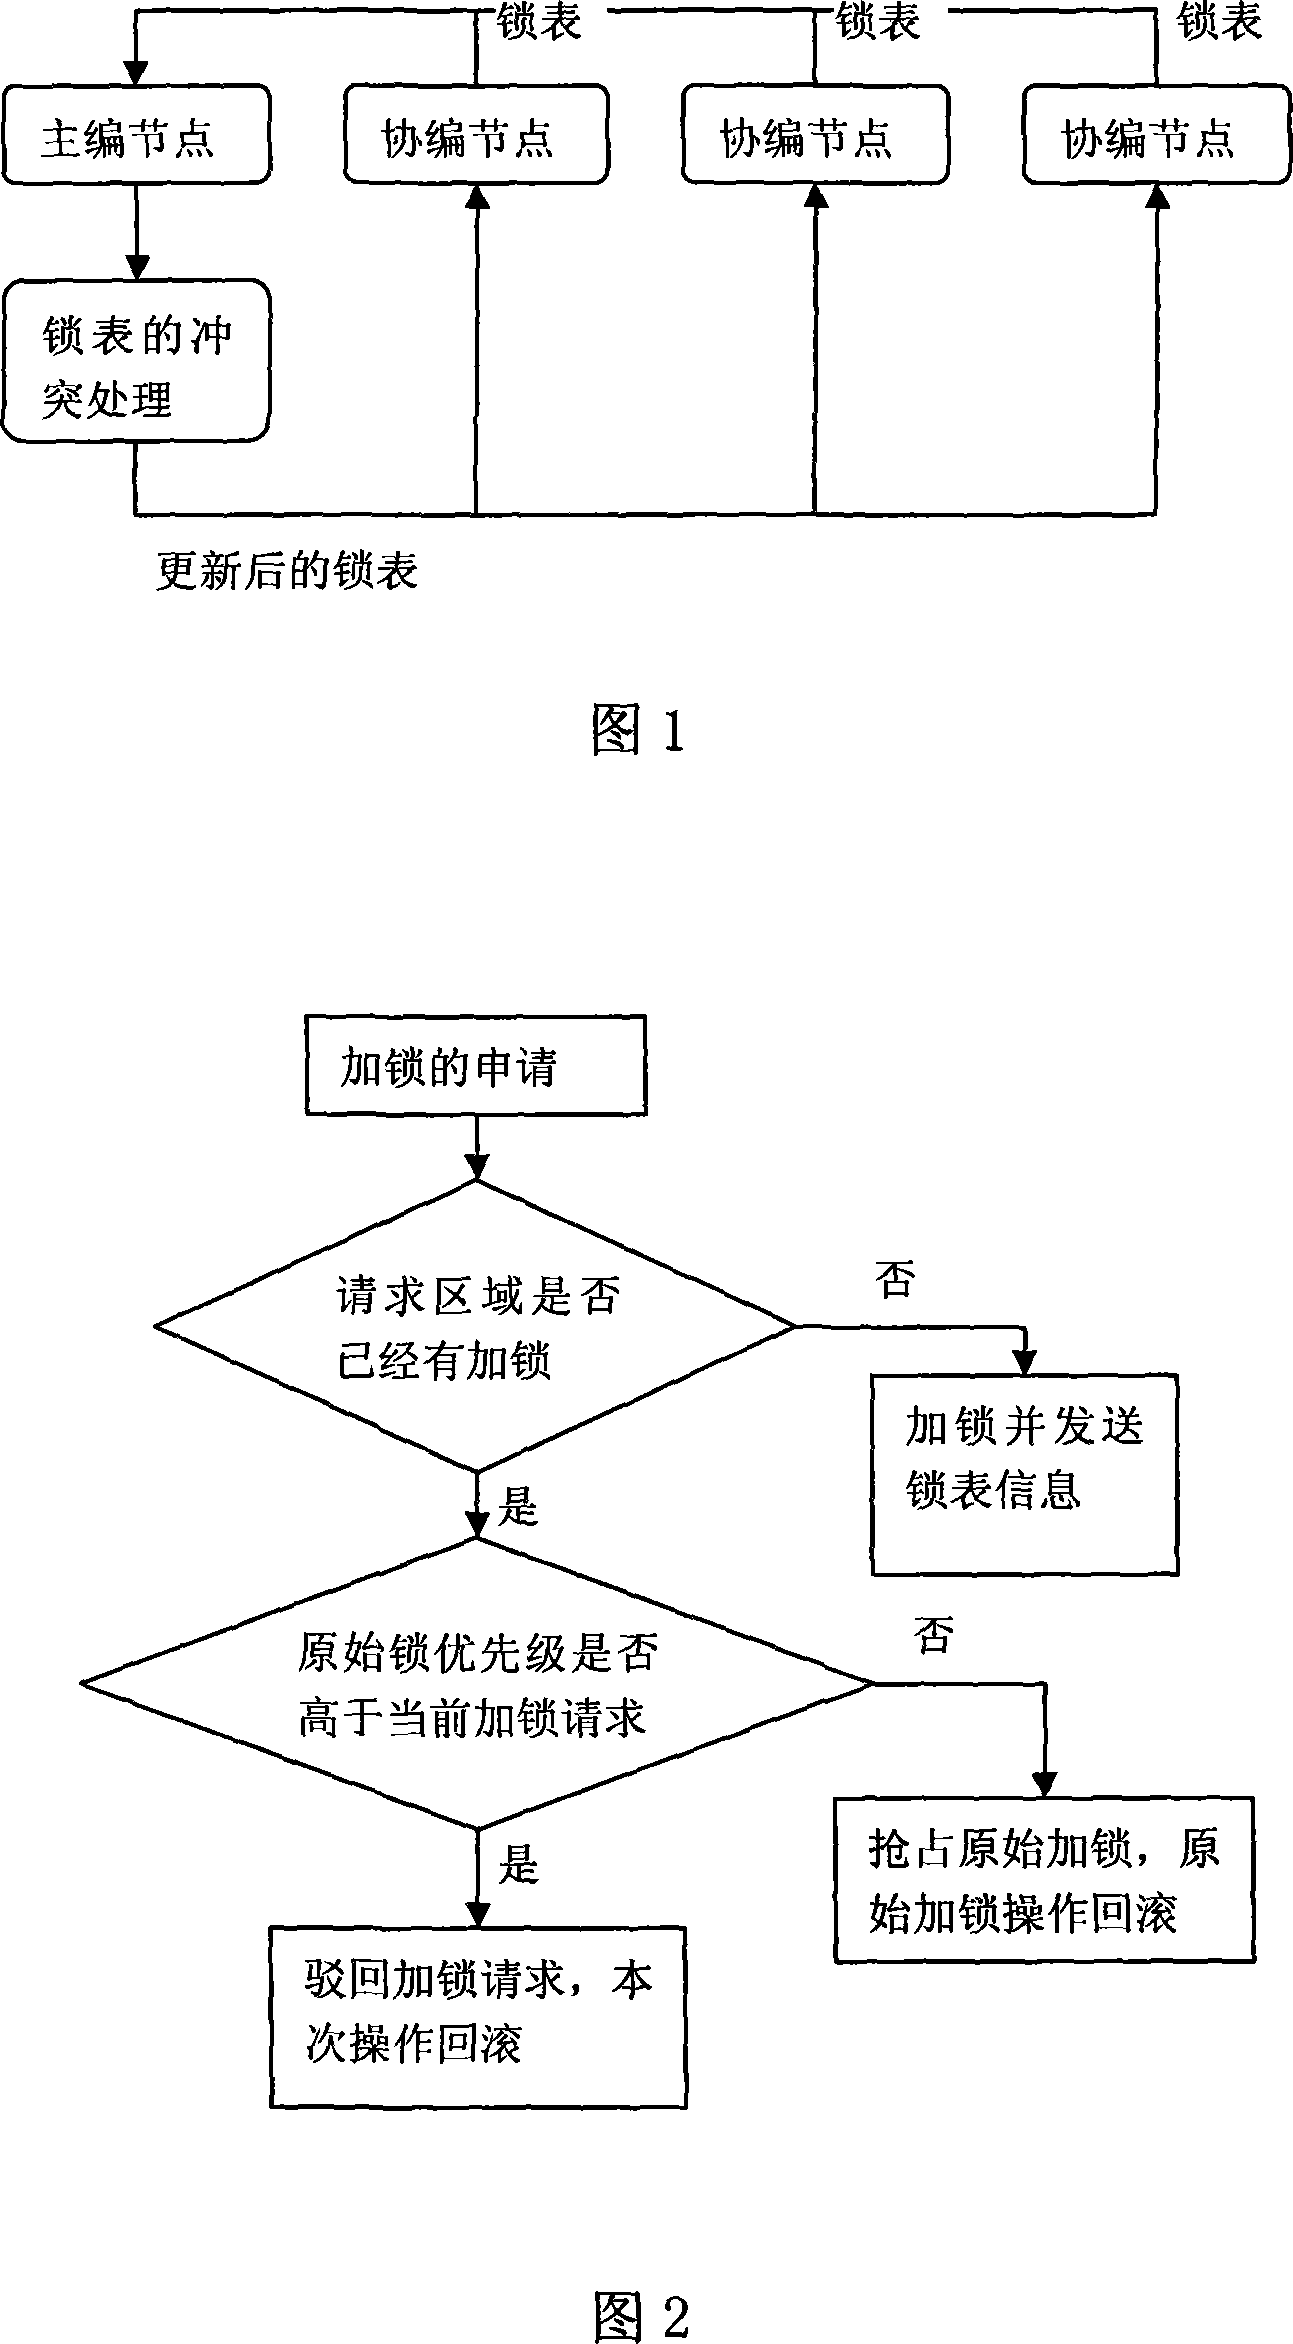 Method for adding lock to data collision module in cooperating edit